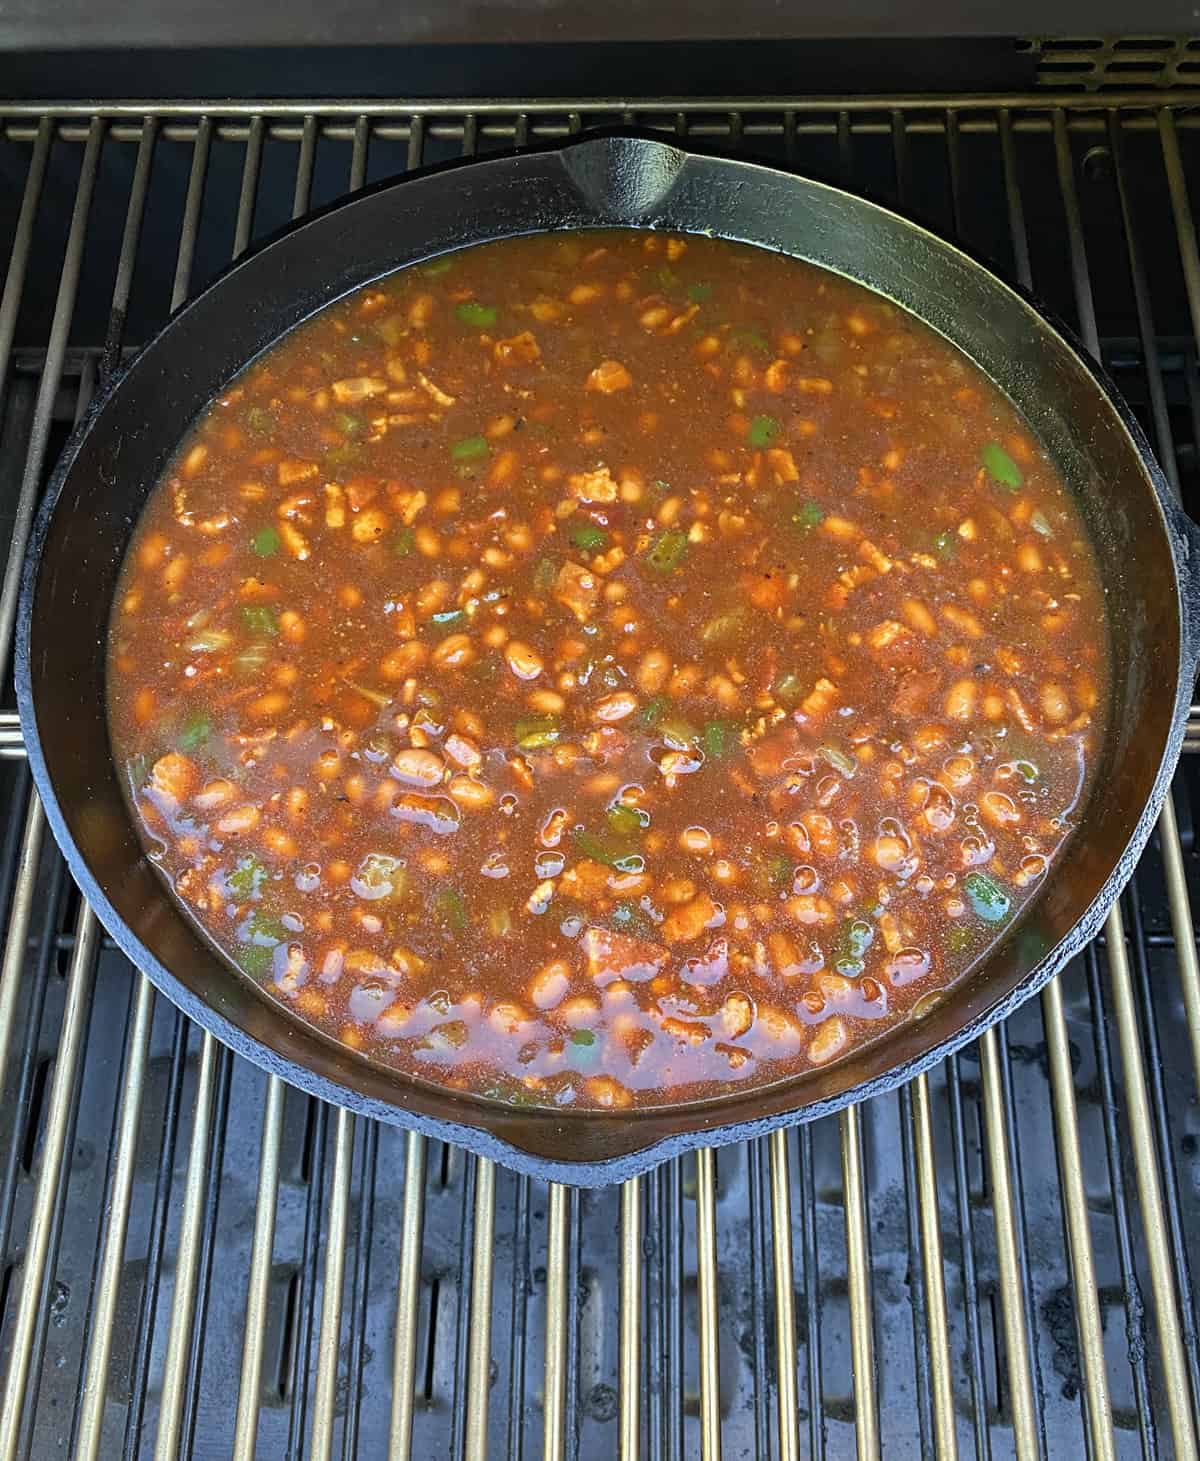 Placing the skillet of baked beans in the smoker.